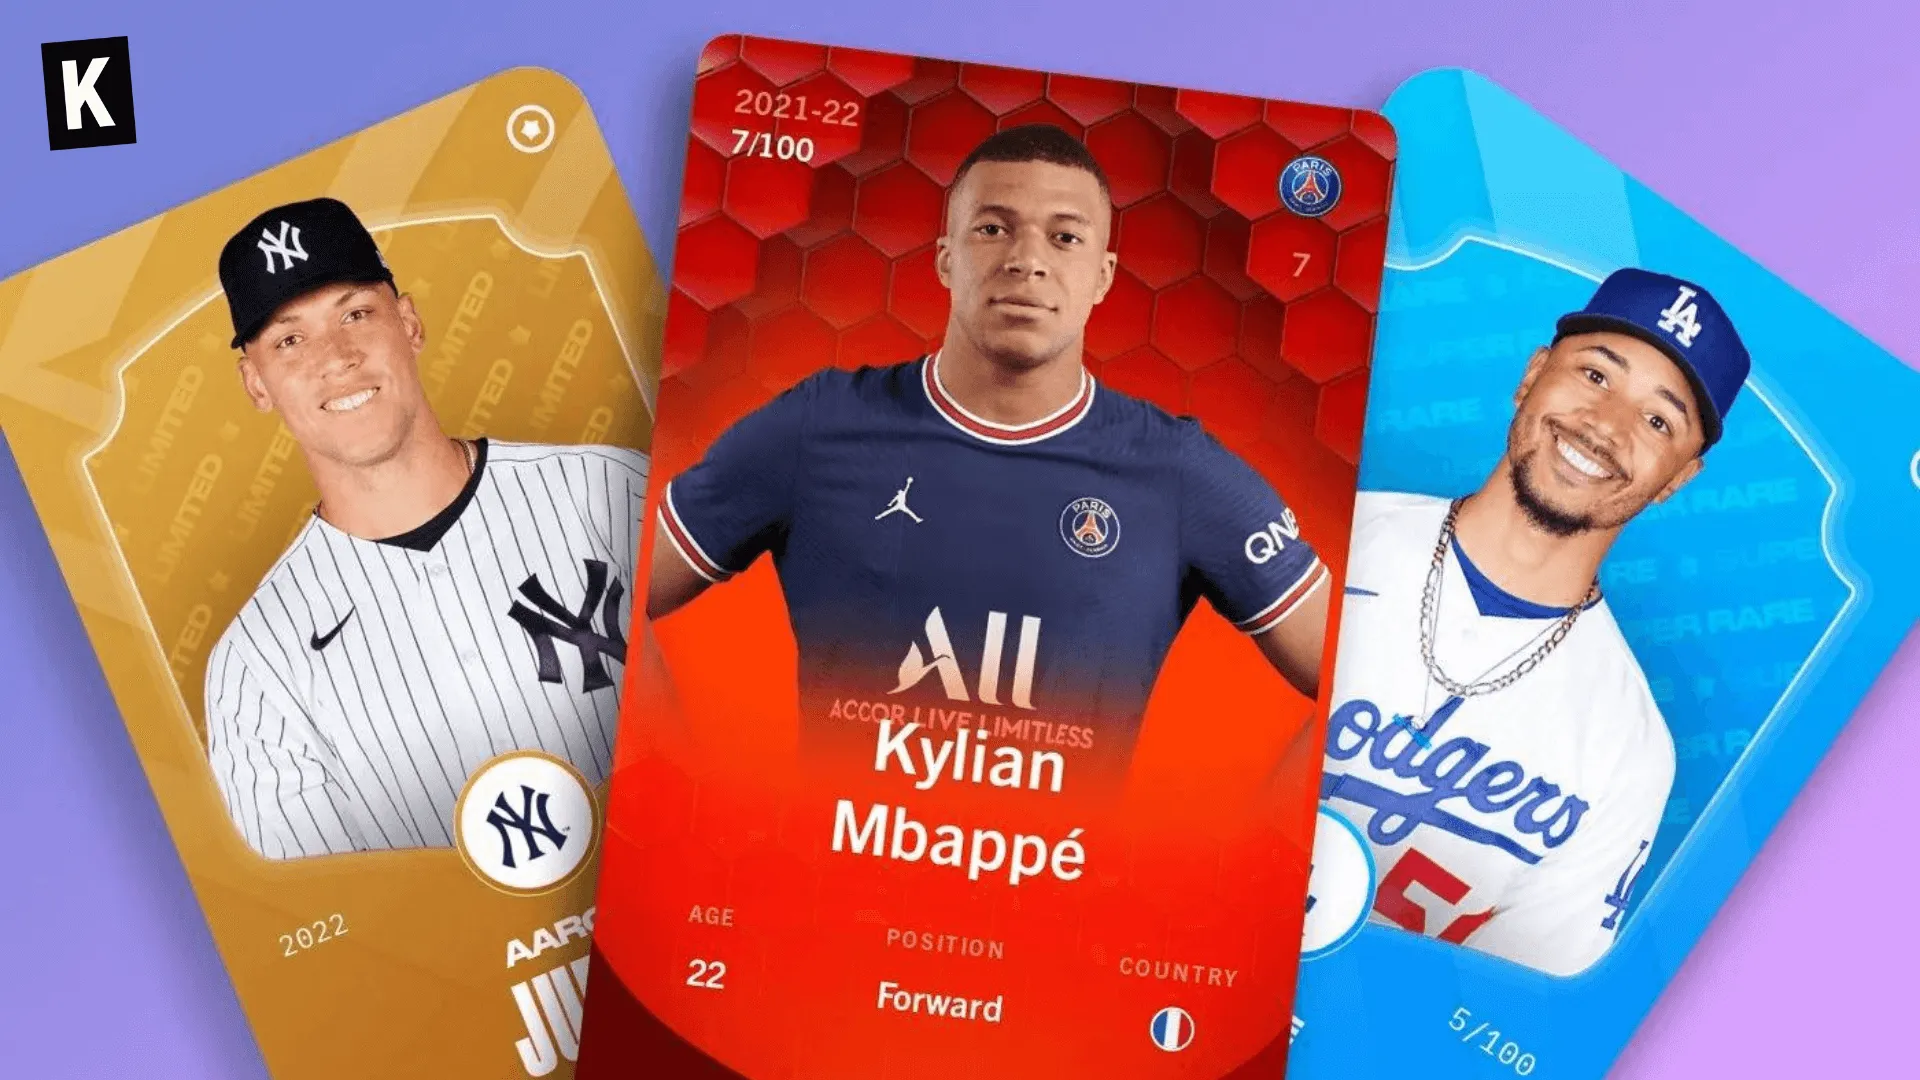 Trading cards from Sorare, with Kylian Mbappé wearing a Paris Saint Germain shirt